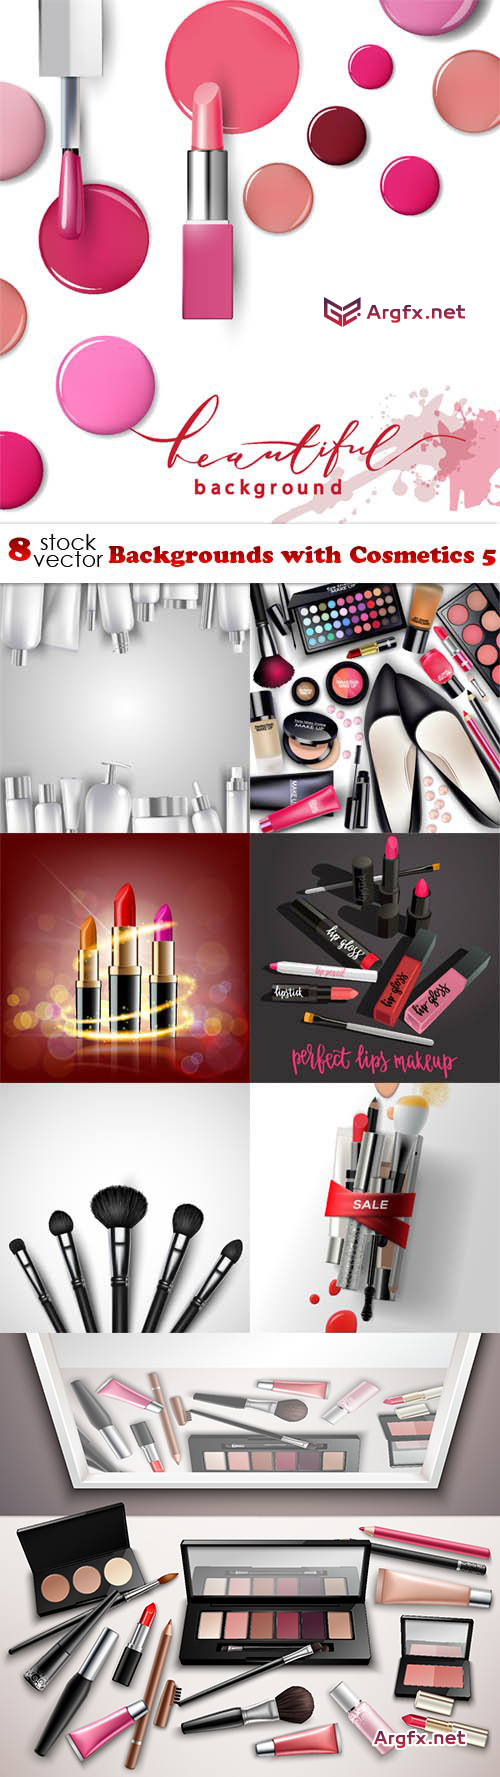  Vectors - Backgrounds with Cosmetics 5